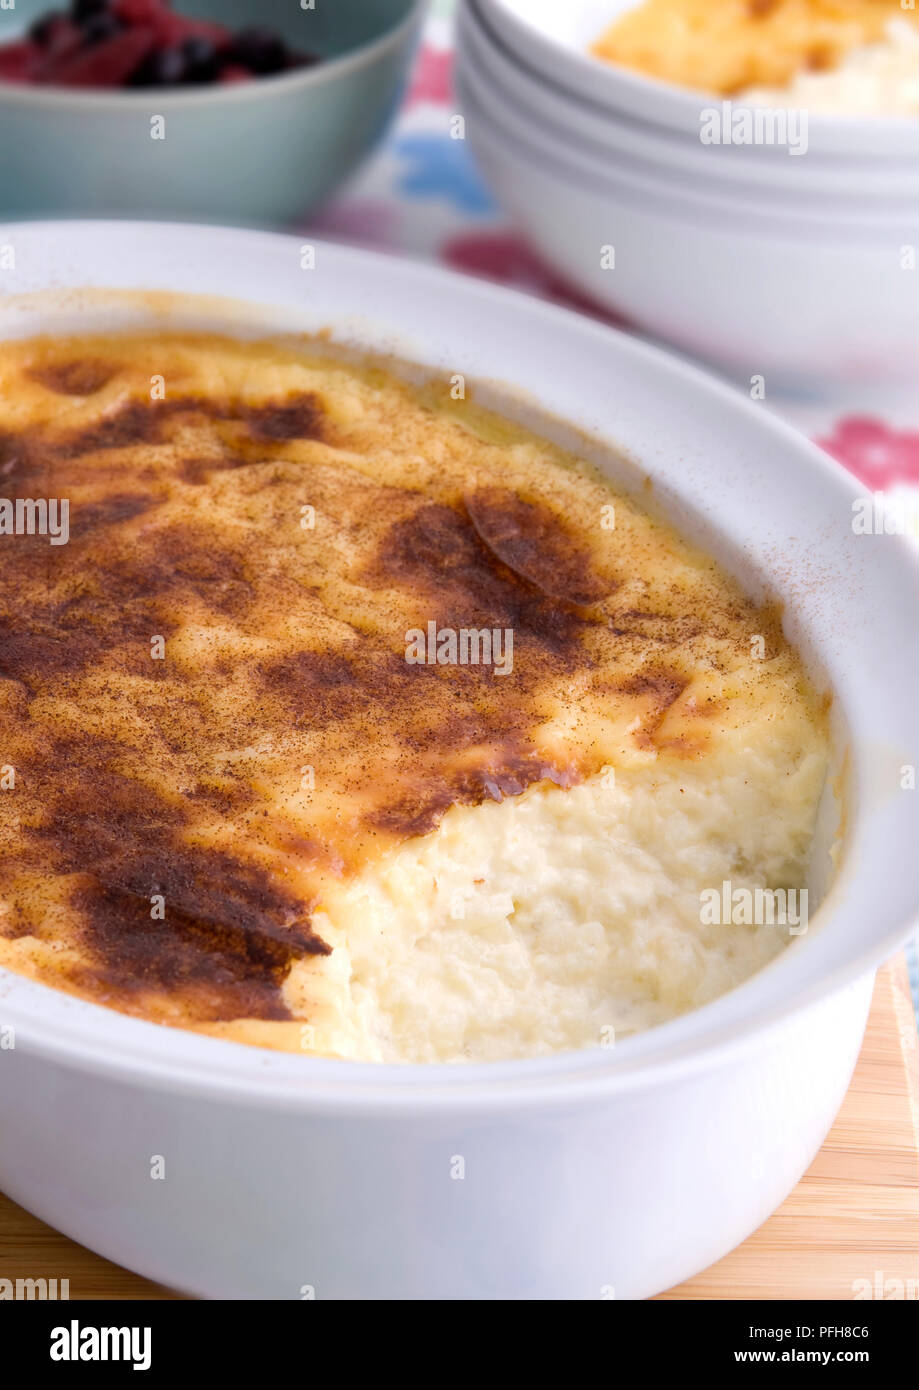 Rice pudding in ovenproof dish, bowls in background, close-up Stock Photo -  Alamy